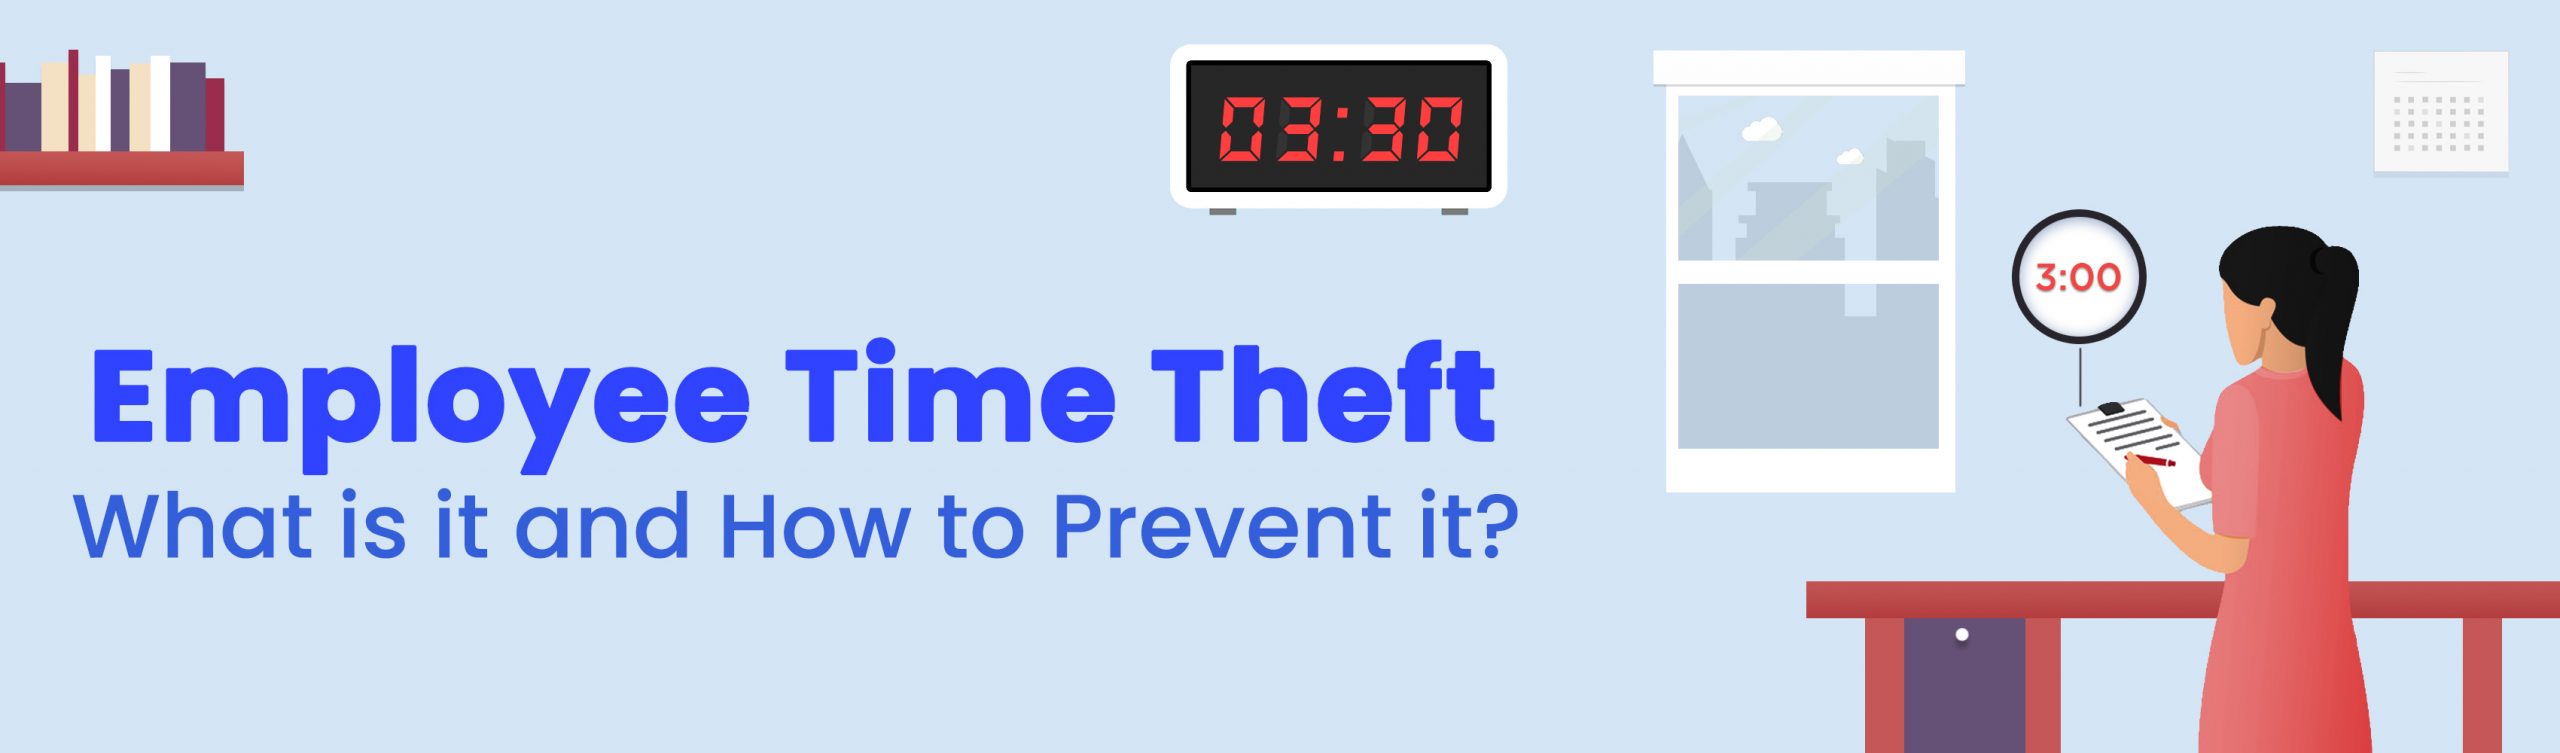 Employee Time Theft and How To Prevent It